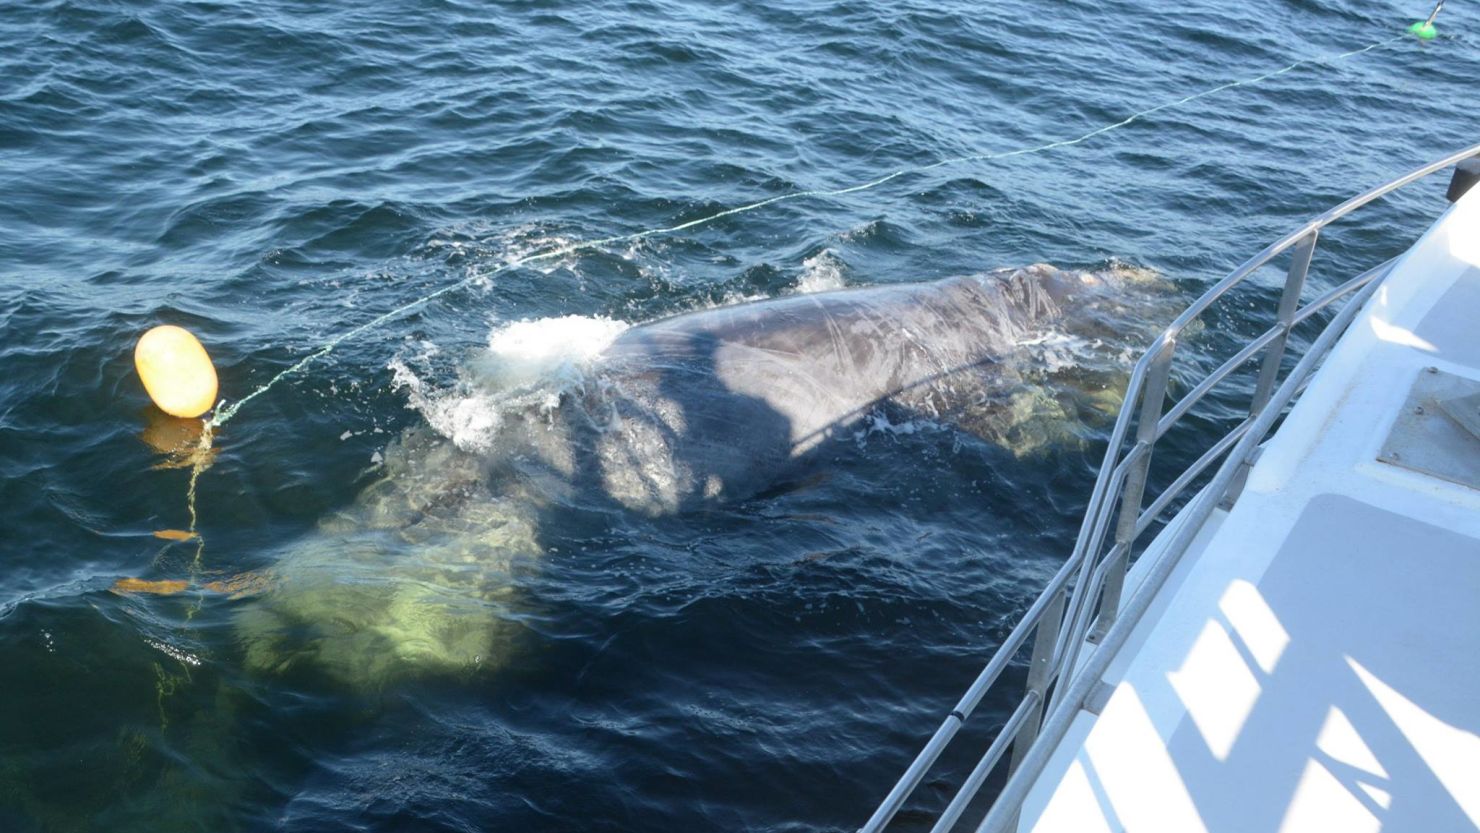 Campobella Whale Rescue Team was part of effort that saved entangled North Atlantic Right Whale on July 5 